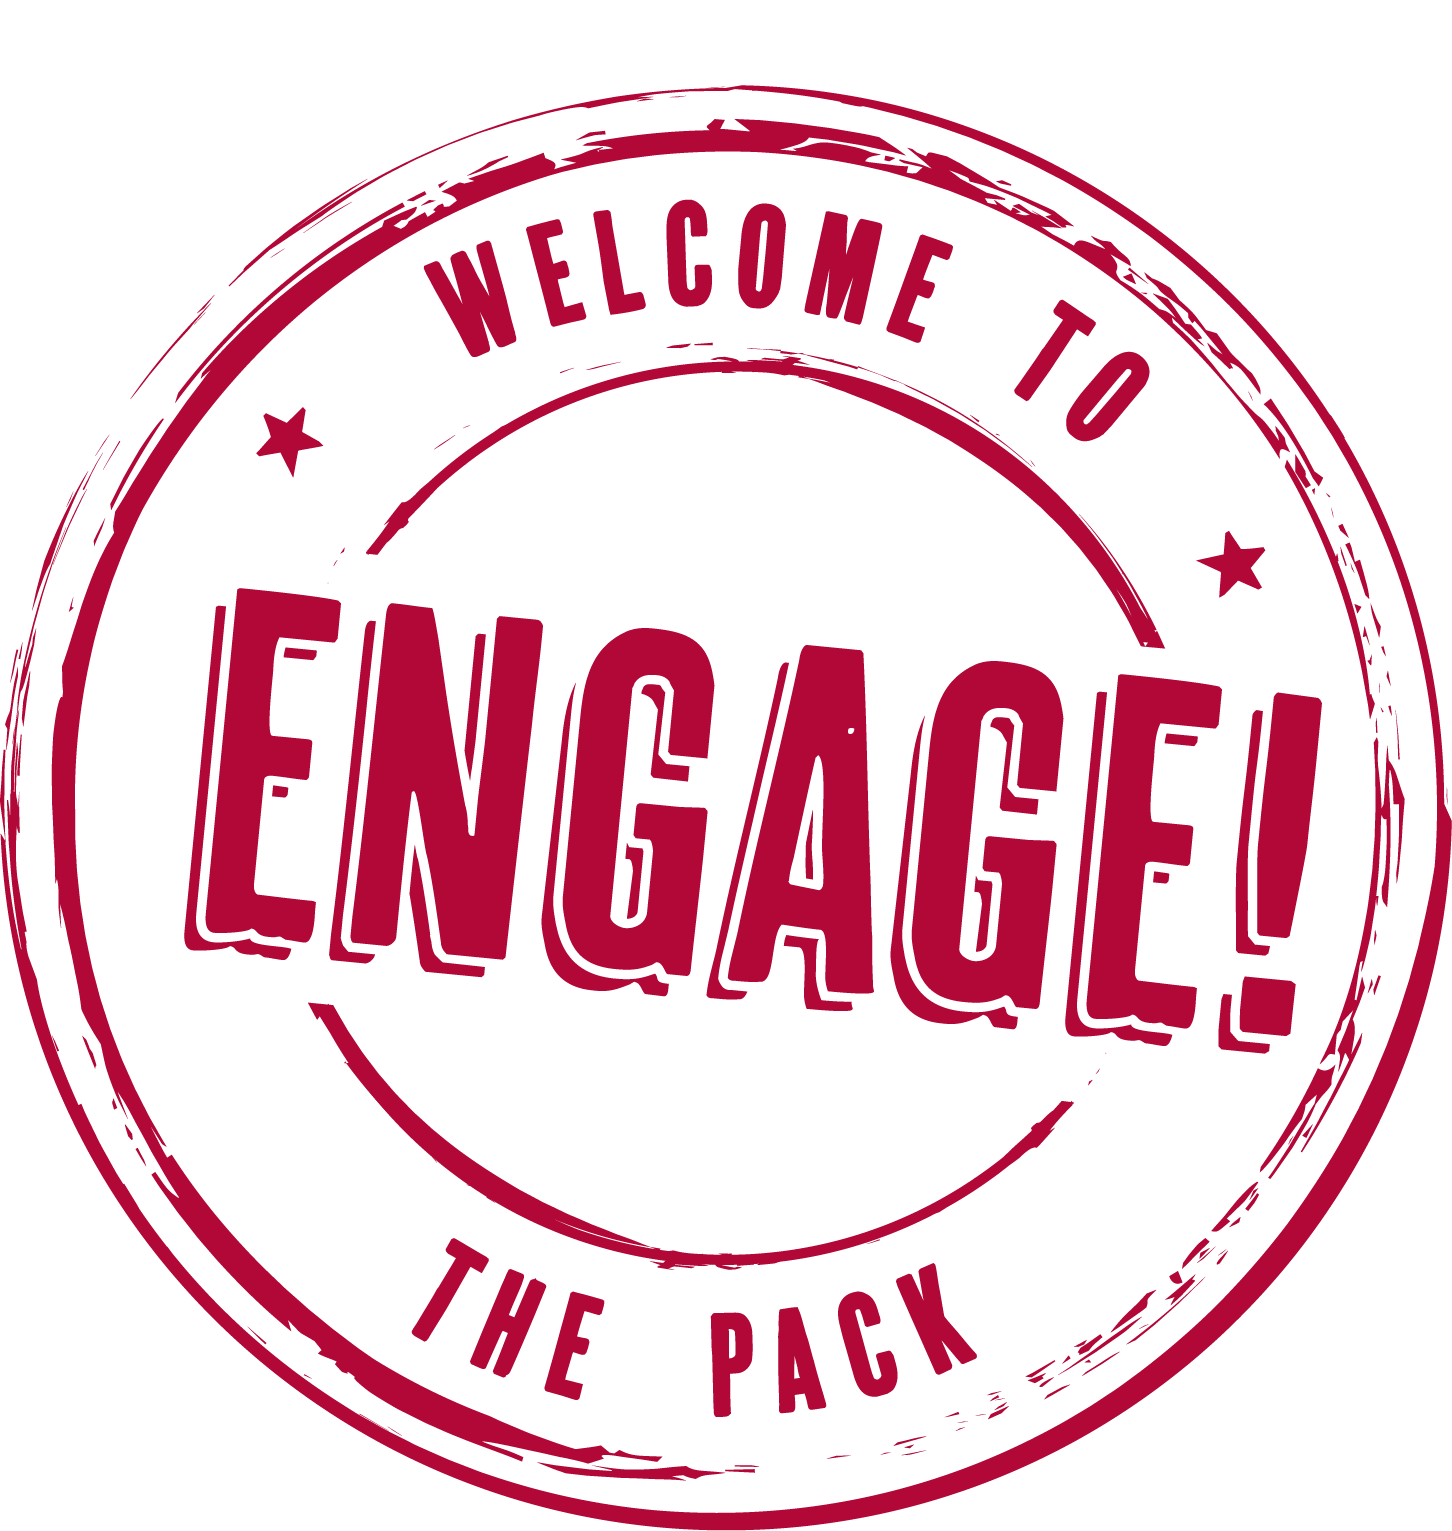 Welcome to Engage the Pack Badge